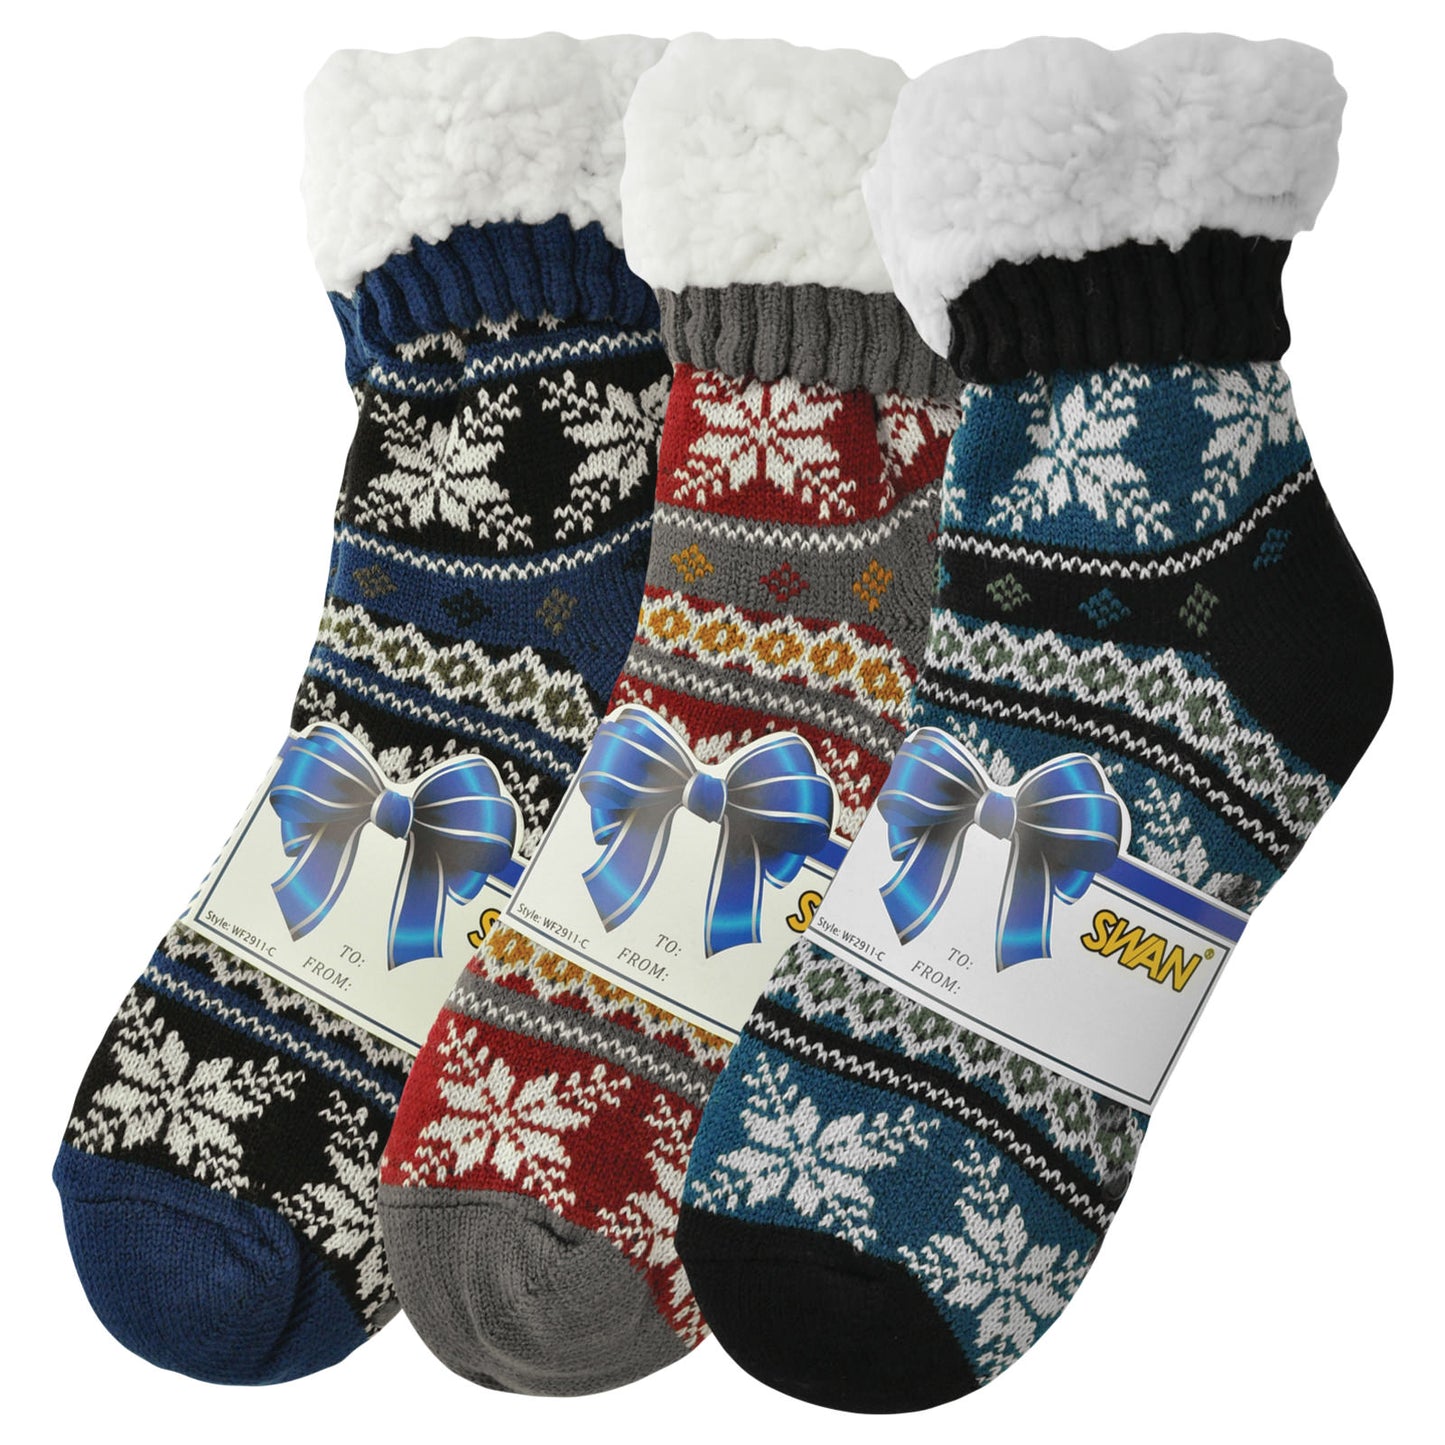 Mens Winter-Weight Sherpa-Lined Knitted Thermal Crew Socks (3-Pairs)